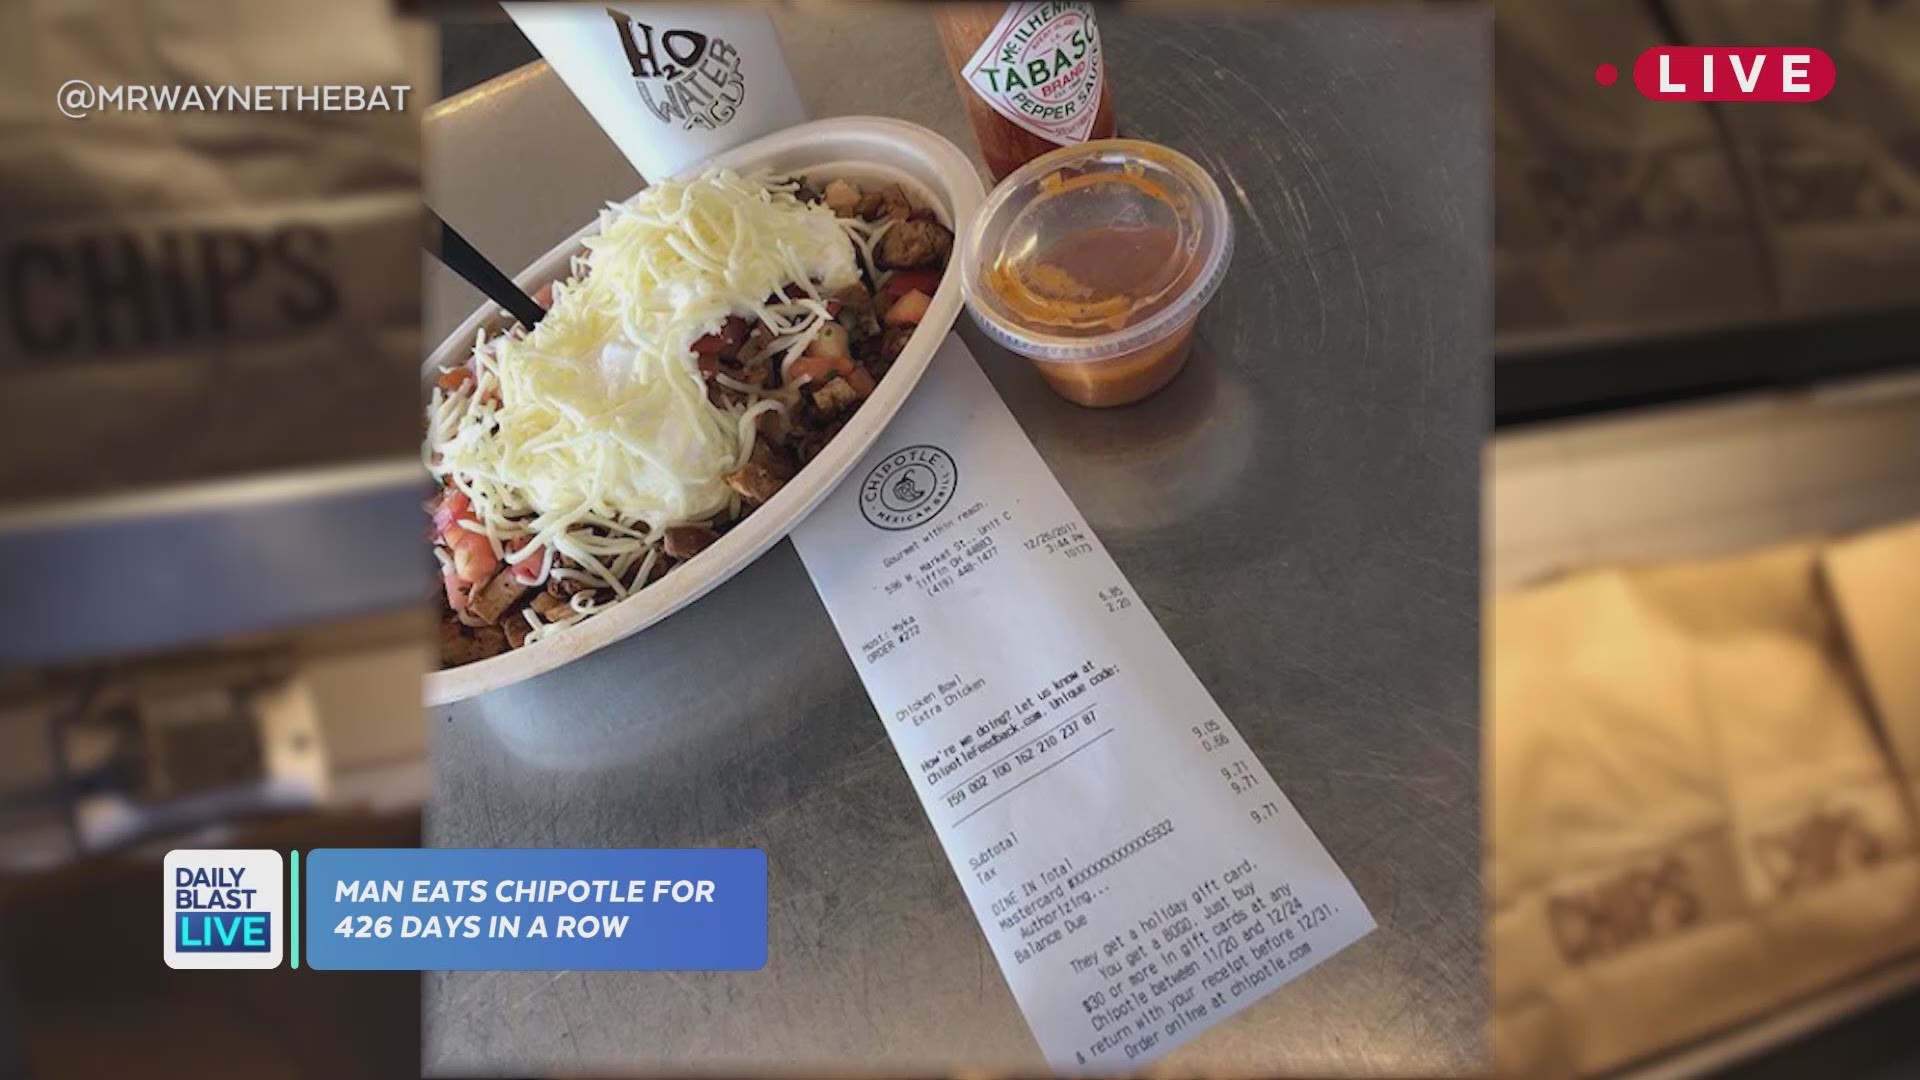 A man from Tiffin, Ohio received Chipotle-inspired superhero gear after dining at the popular restaurant chain for 426 consecutive days. Bruce Wayne documented his daily trips on Instagram with each photo depicting his meal and the receipt of purchase. 